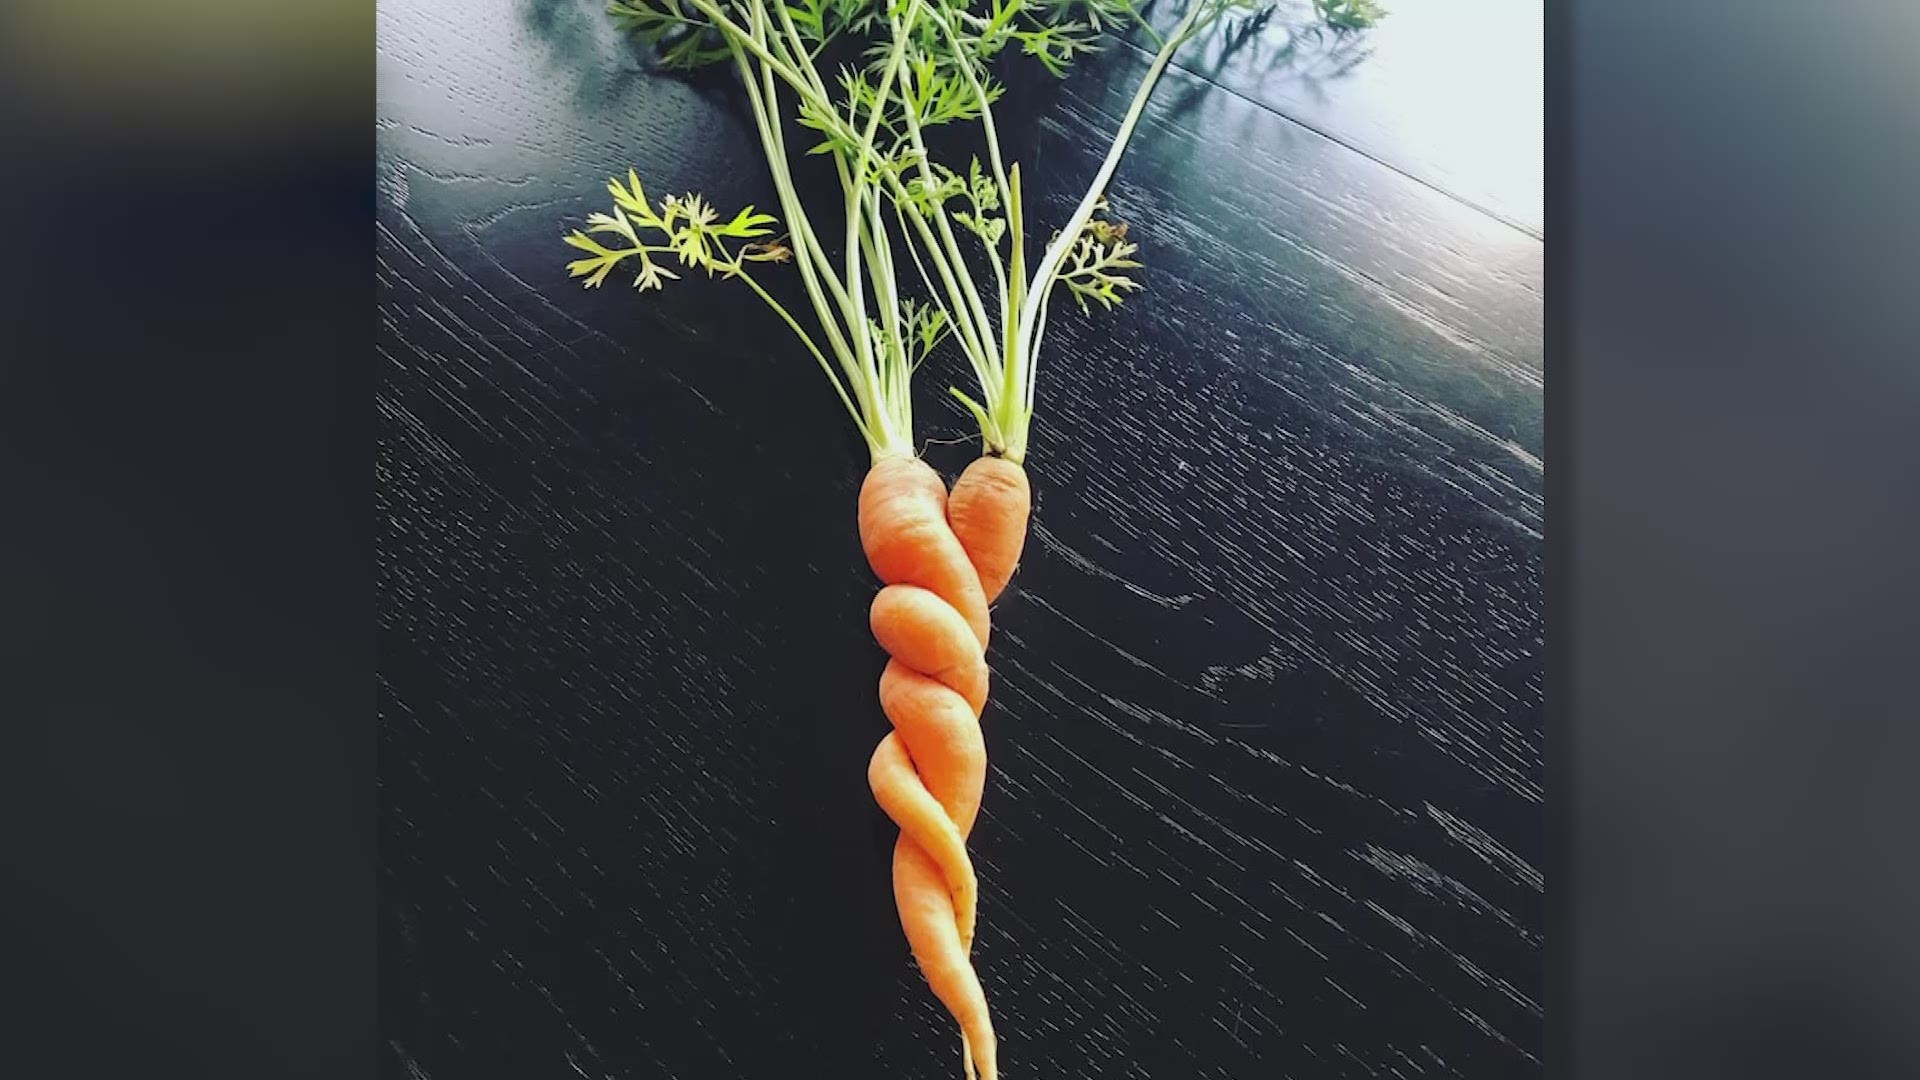 Iowans share their Happy Moments including a carrot with a twist, and two garden friends that defy gravity.